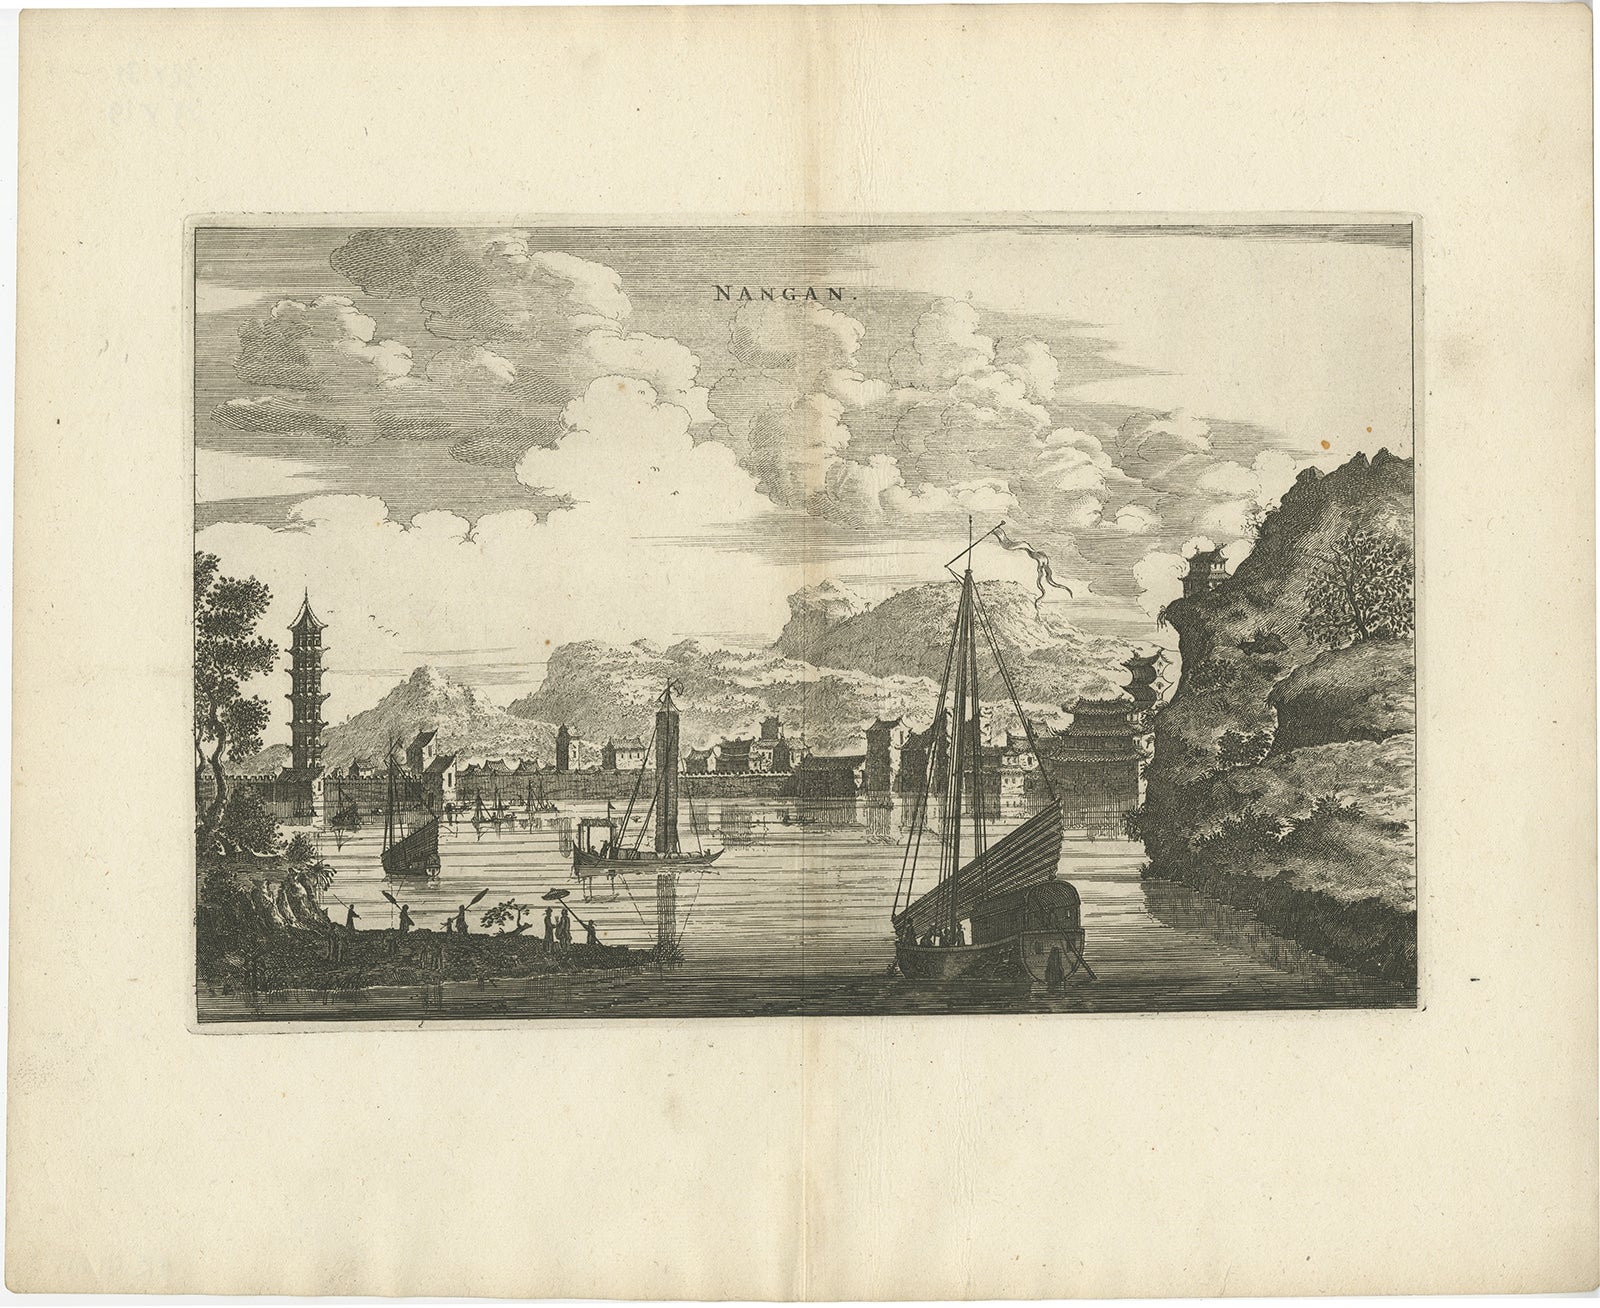 Antique print China titled 'Nangan'. Old print depicting a view on the city of Nangan with its ramparts and a Pagoda. This print originates from the Latin edition of Nieuhof's work titled 'Legatio batavica ad magnum Tartariæ chamum Sungteium